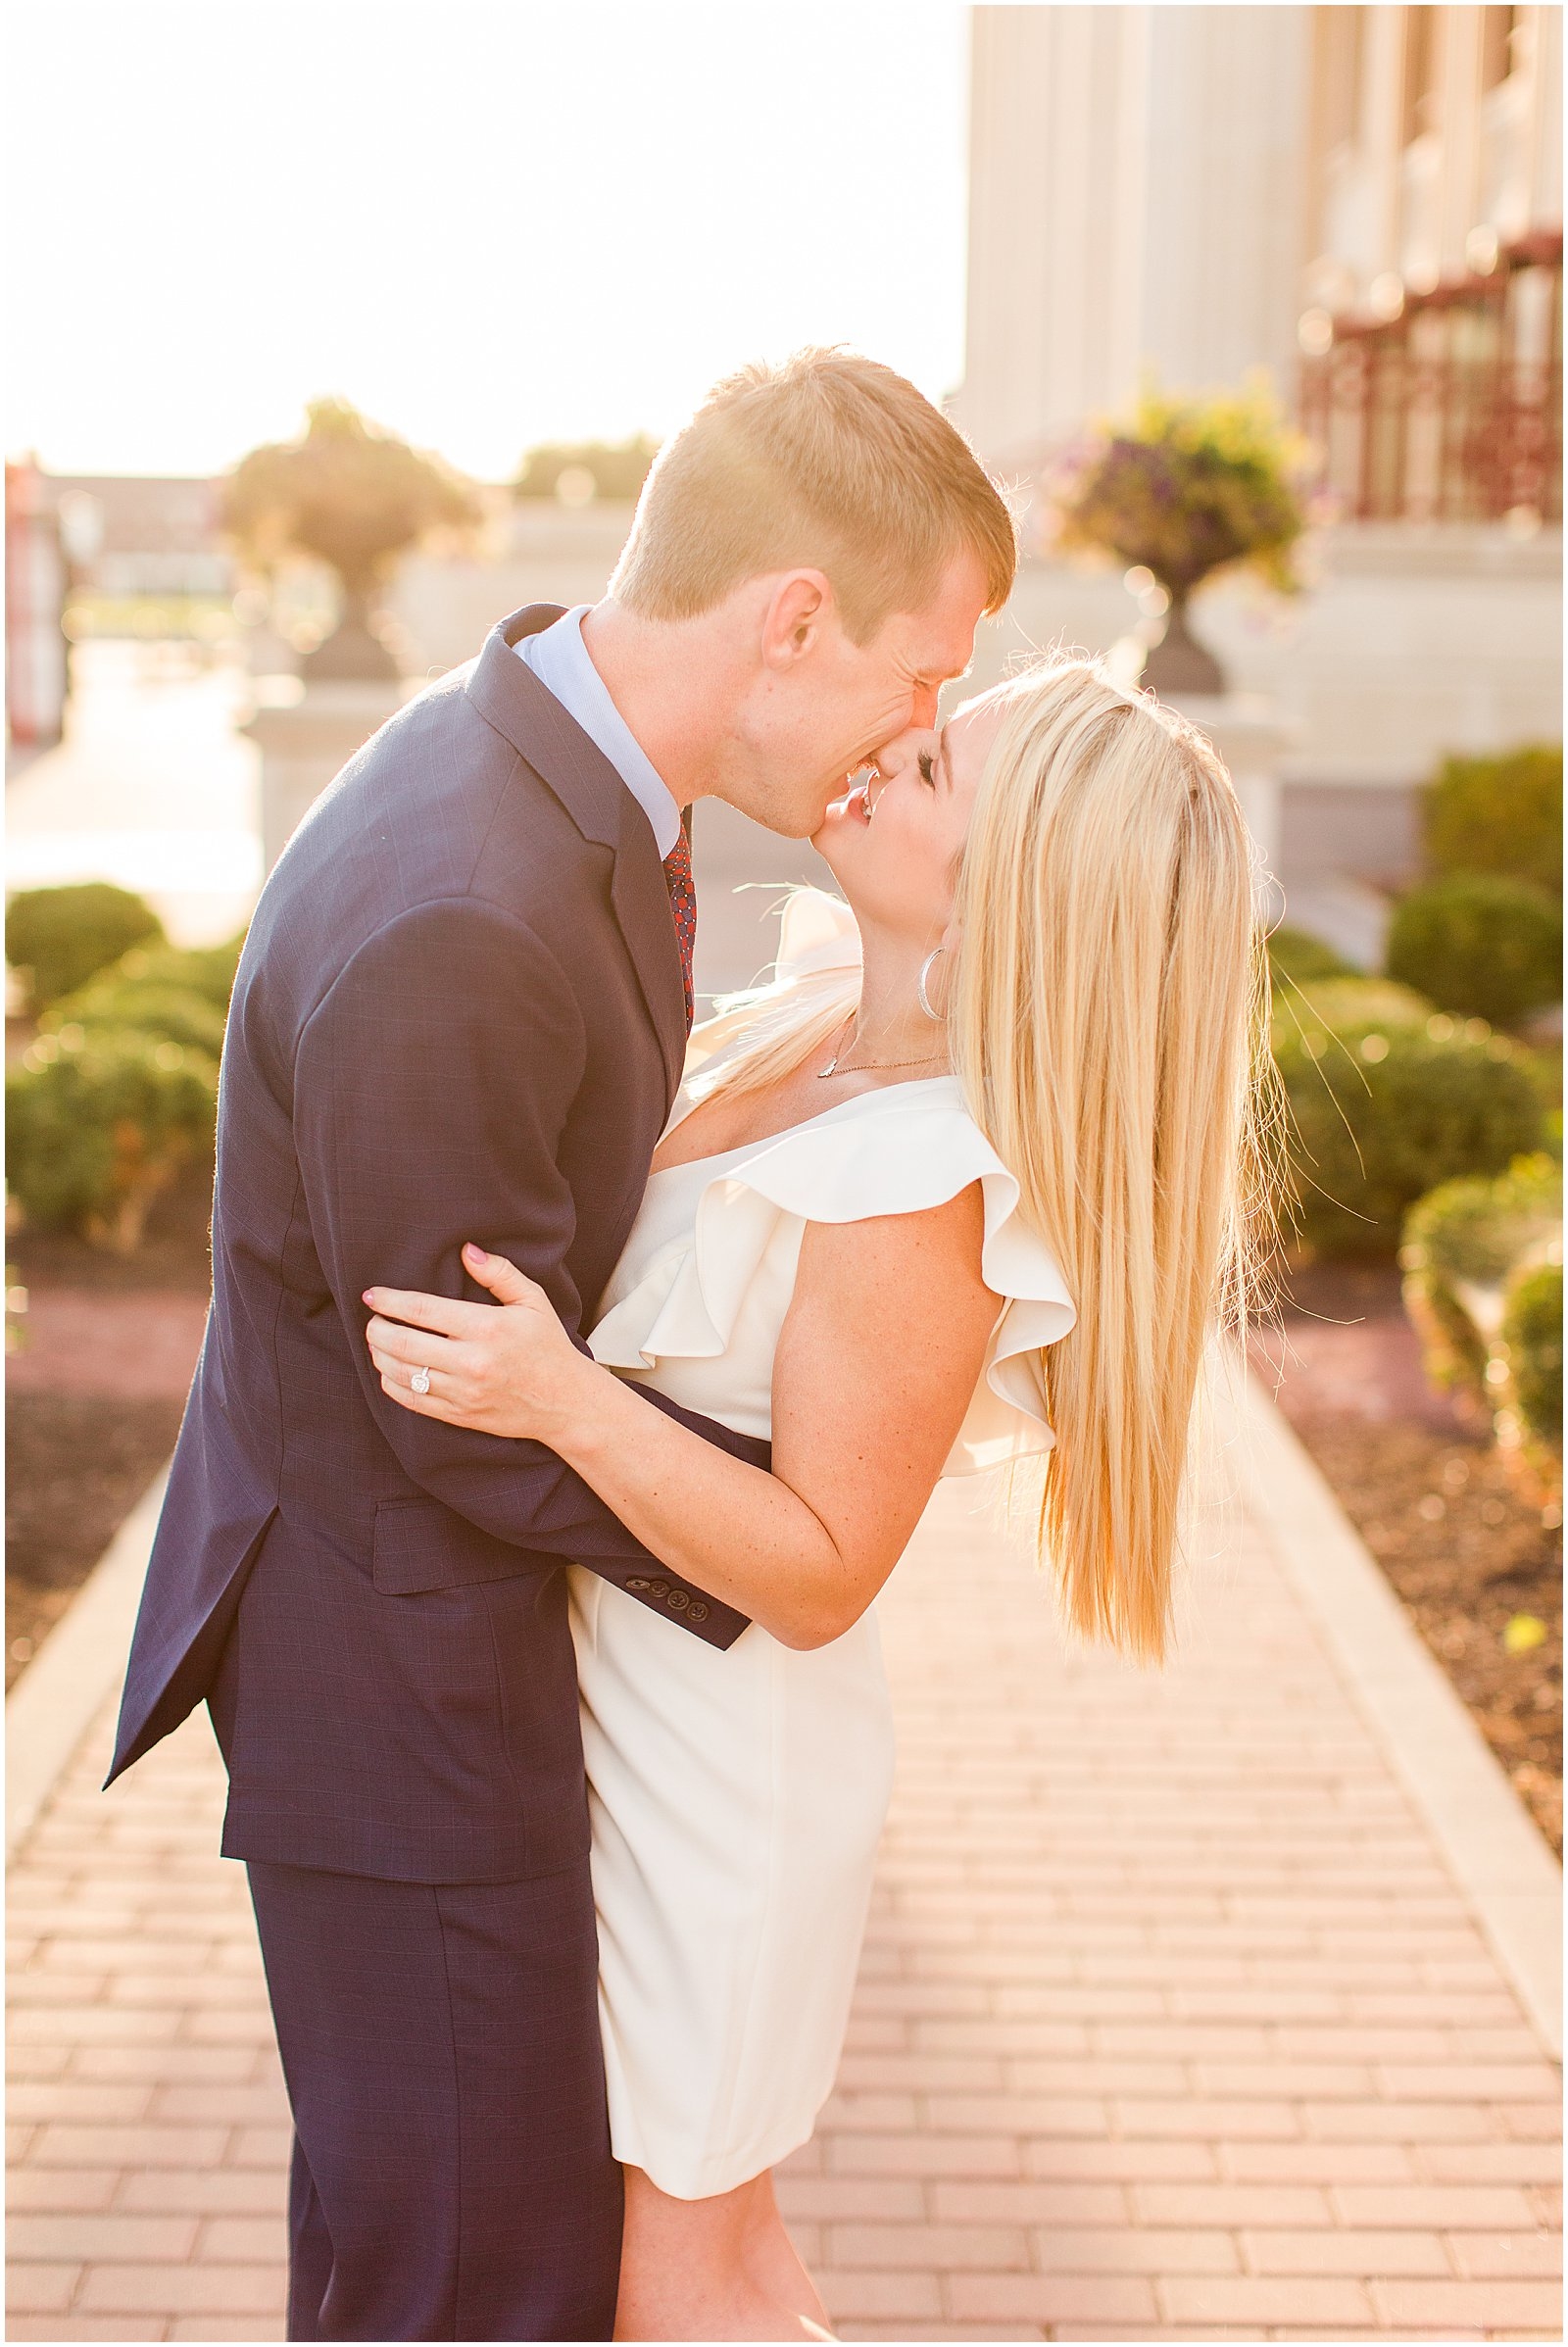 A Cute and Cuddly Engagement Session in Carmel, IN | Abbi and Josh0019.jpg